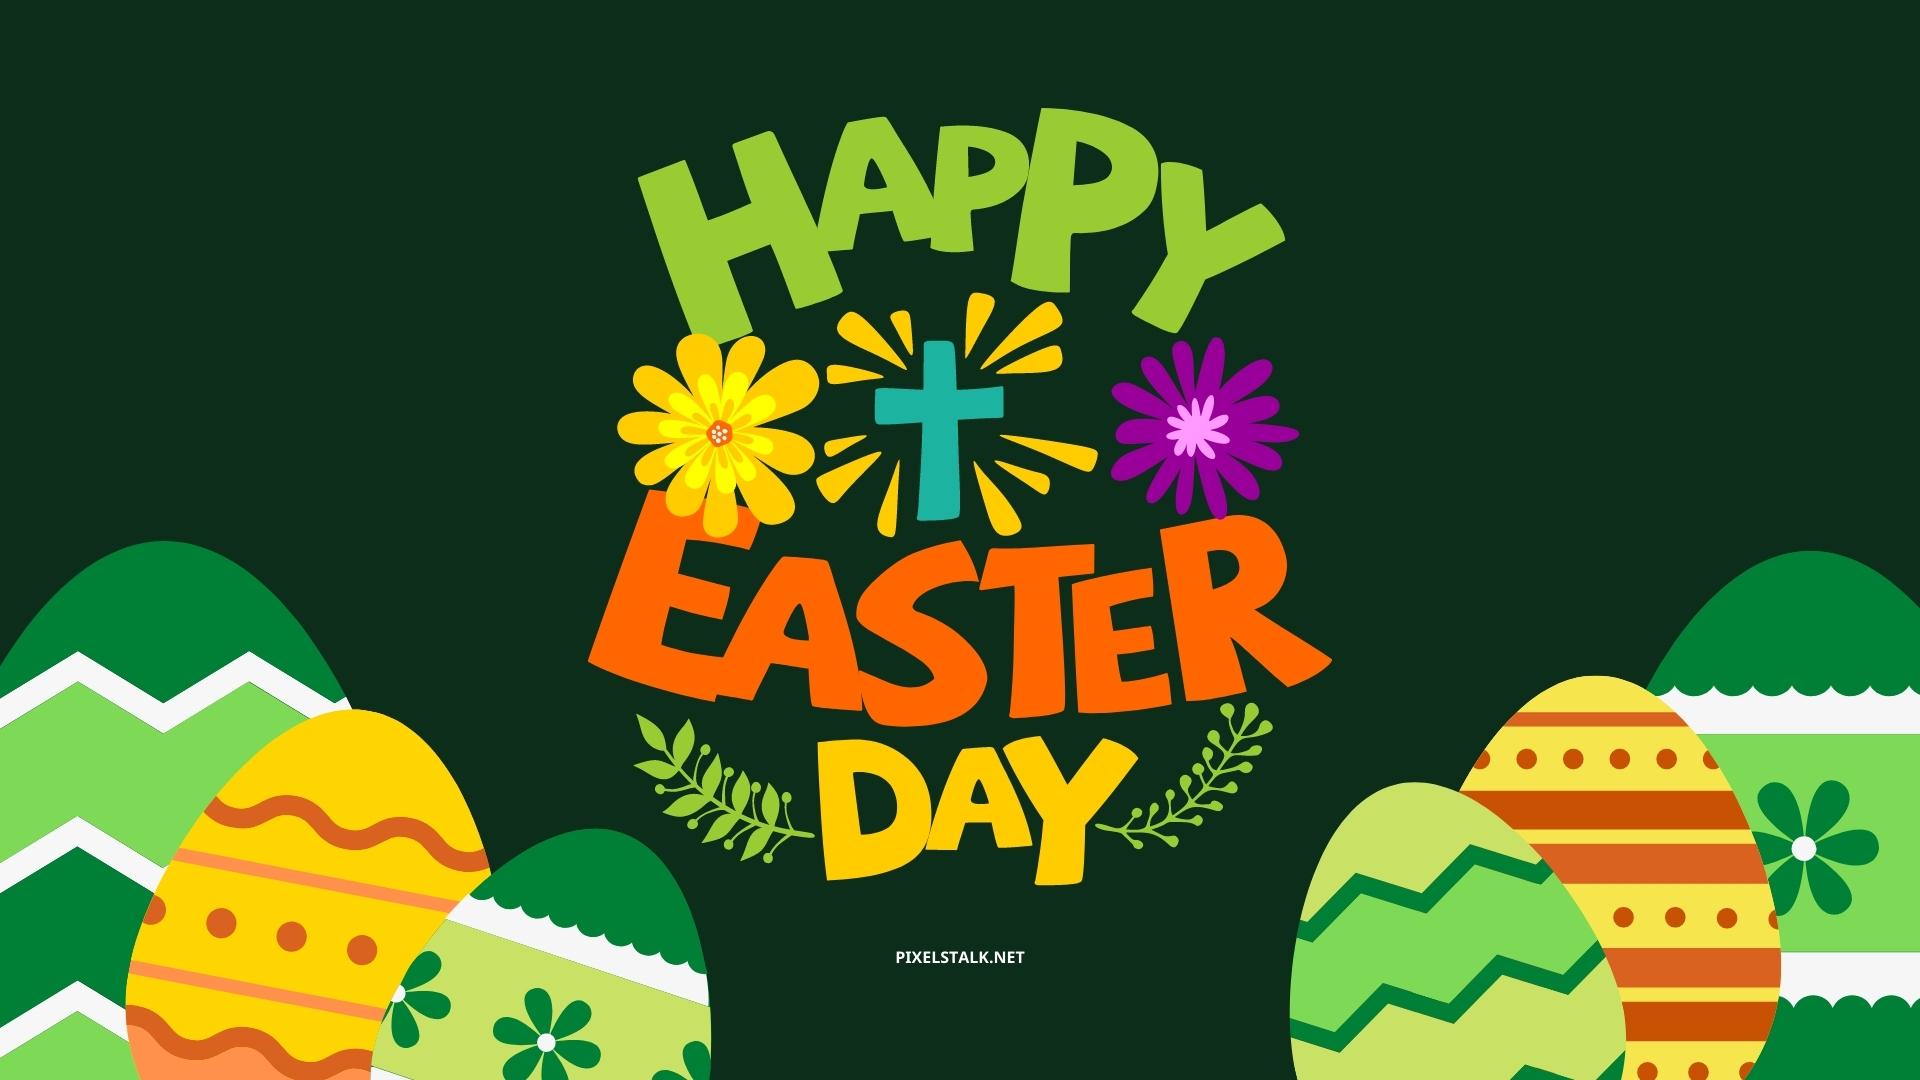 22500 Easter Sunday Stock Photos Pictures  RoyaltyFree Images  iStock   Easter Resurrection Easter sunday religious